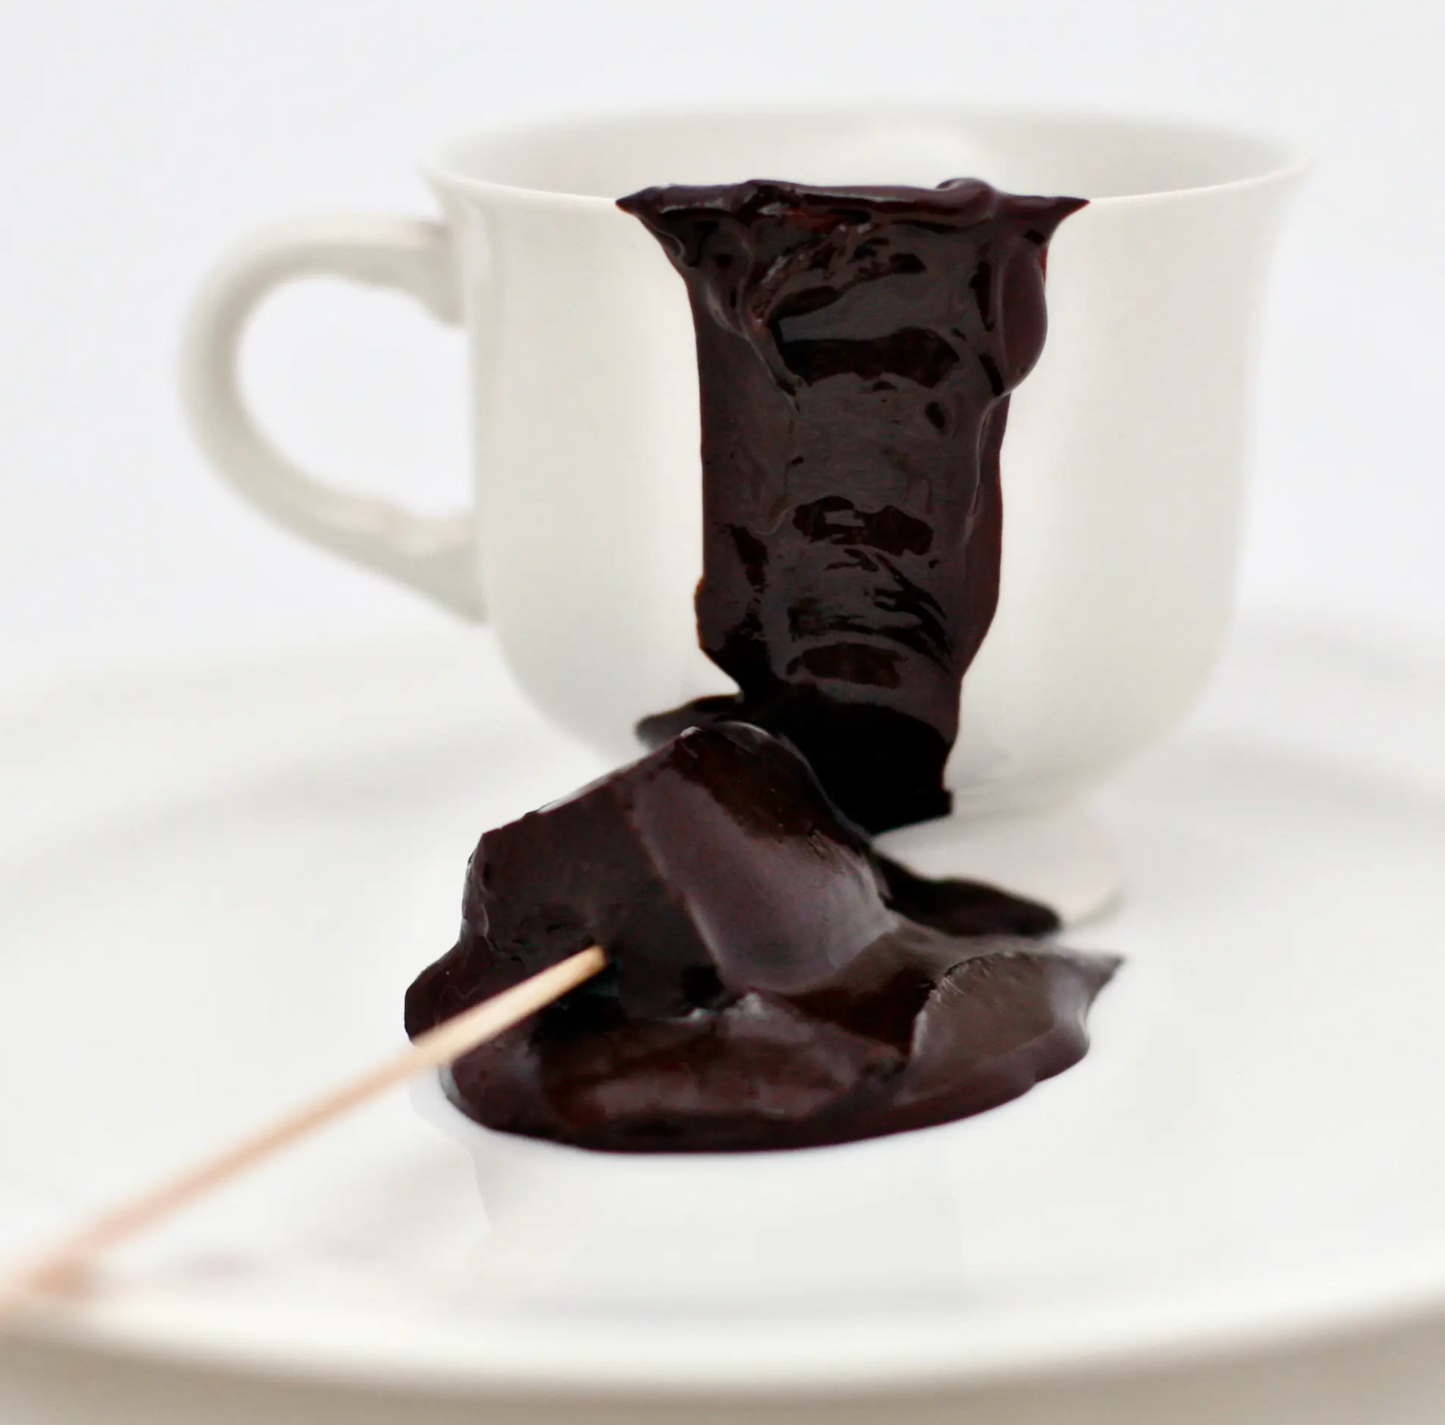 Mexican Dark Hot Chocolate on a Stick